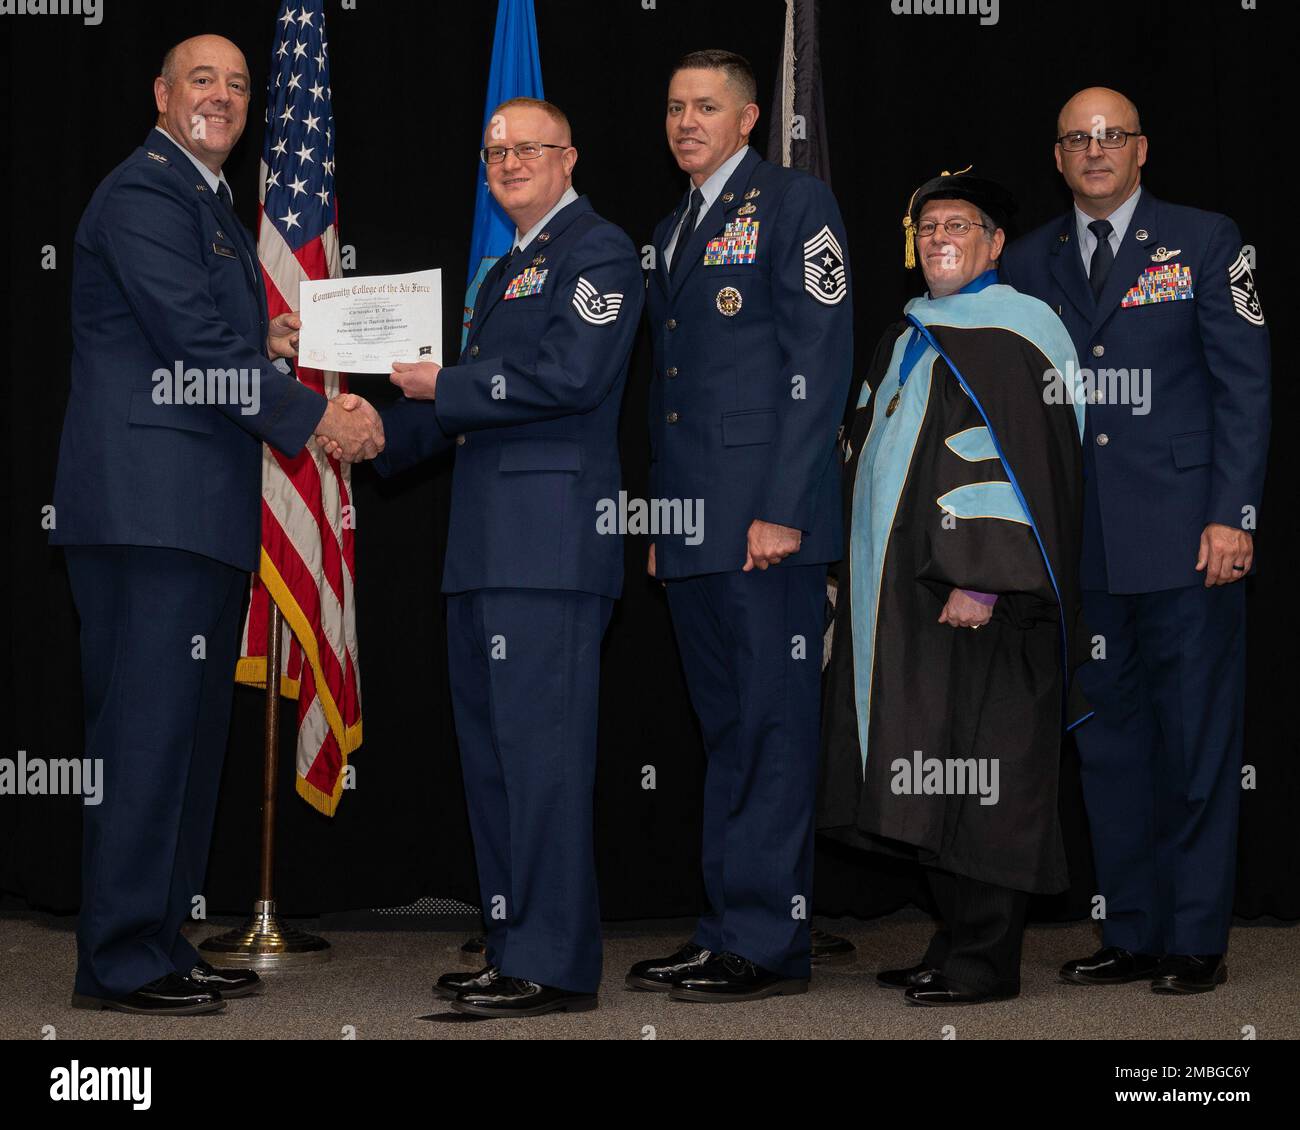 Col. Patrick Miller, 88th Air Base Wing and installation commander, presents Tech. Sgt. Christopher Tracy with his associate in applied science degree in information systems technology during the Community College of the Air Force graduation ceremony June 15, 2022, at the National Museum of the Air Force, Wright-Patterson Air Force Base, Ohio. With Miller were Jason Schaffer, 88 ABW command chief; Donald Ellwood, CCAF Education Services director; and Chief Master Sgt. James Fitch, Air Force Research Laboratory command chief; who gave the commencement address. Stock Photo